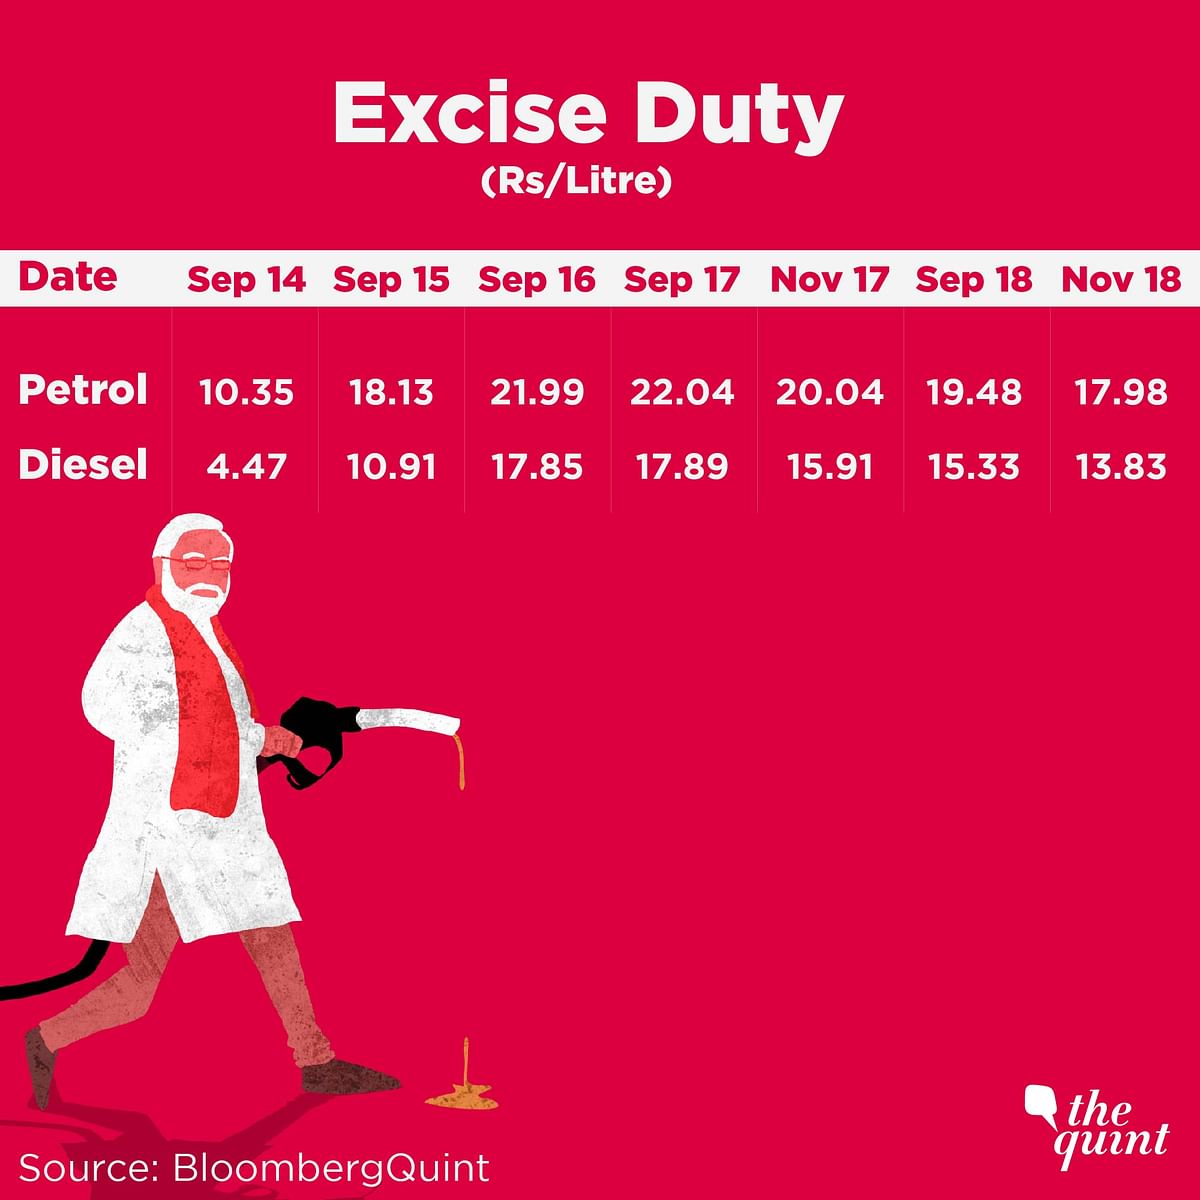 Modi government has committed a fuel folly that cost us Rs 1 lakh crore in an hour, writes Raghav Bahl.